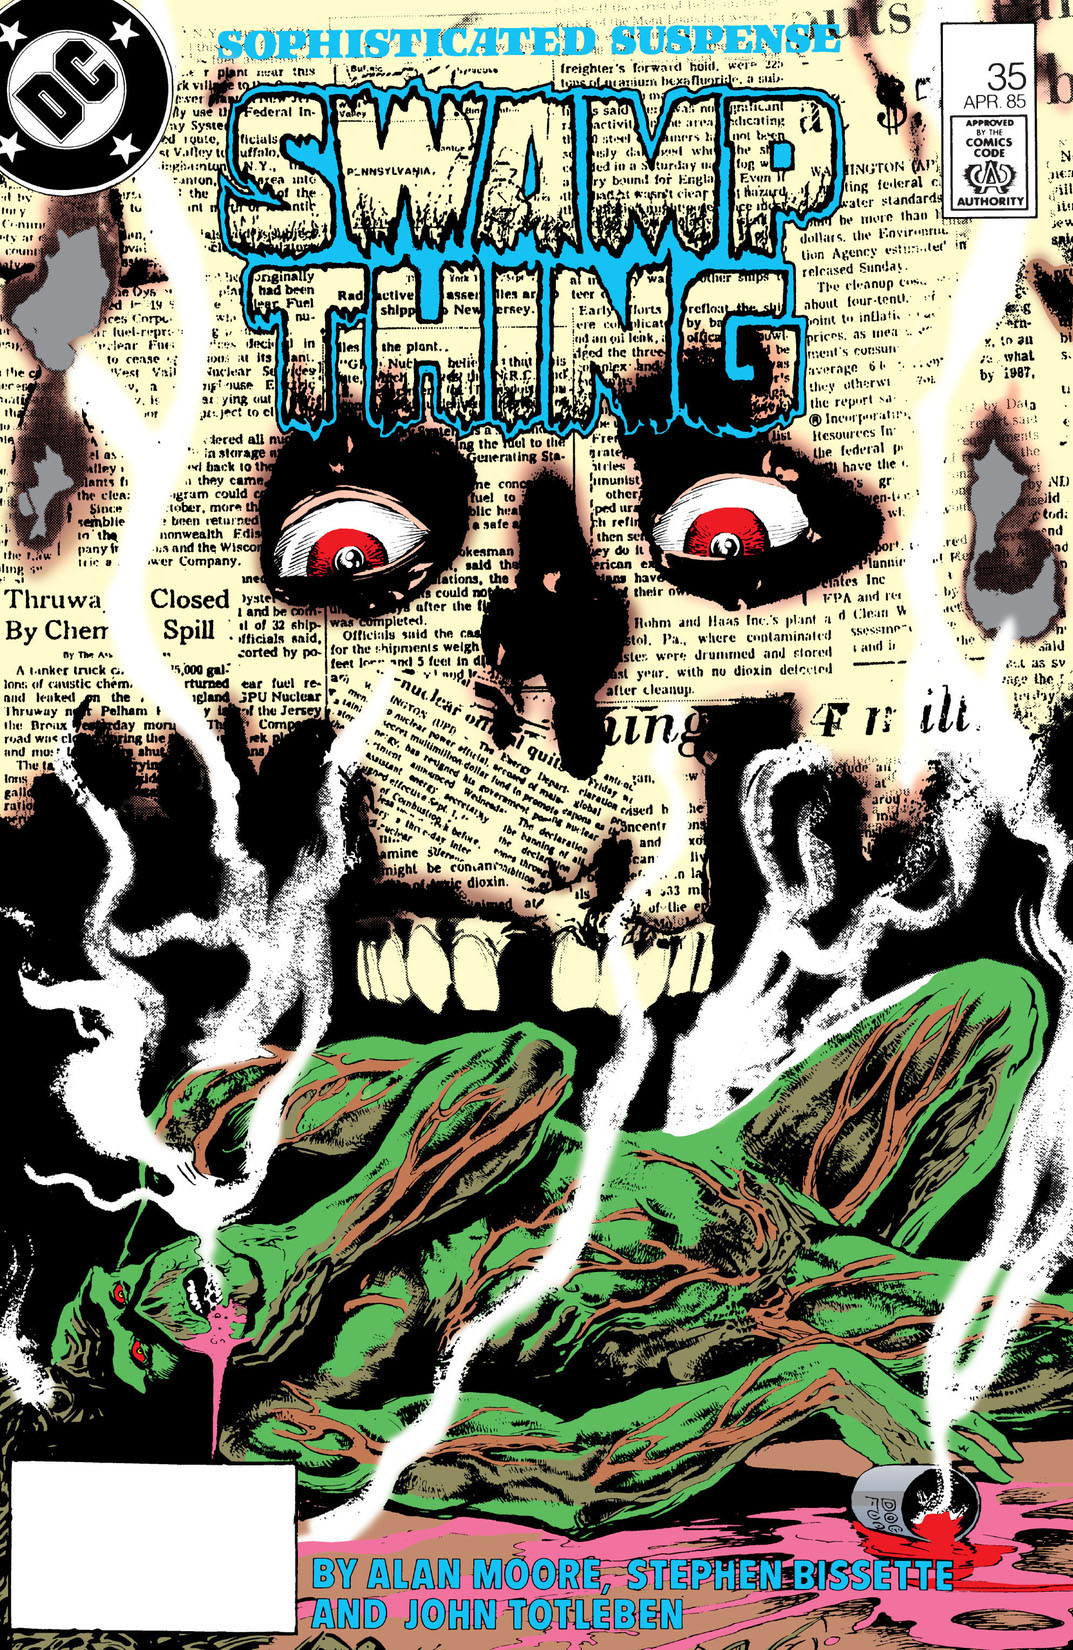 The Saga of the Swamp Thing (1982-) #35 preview images